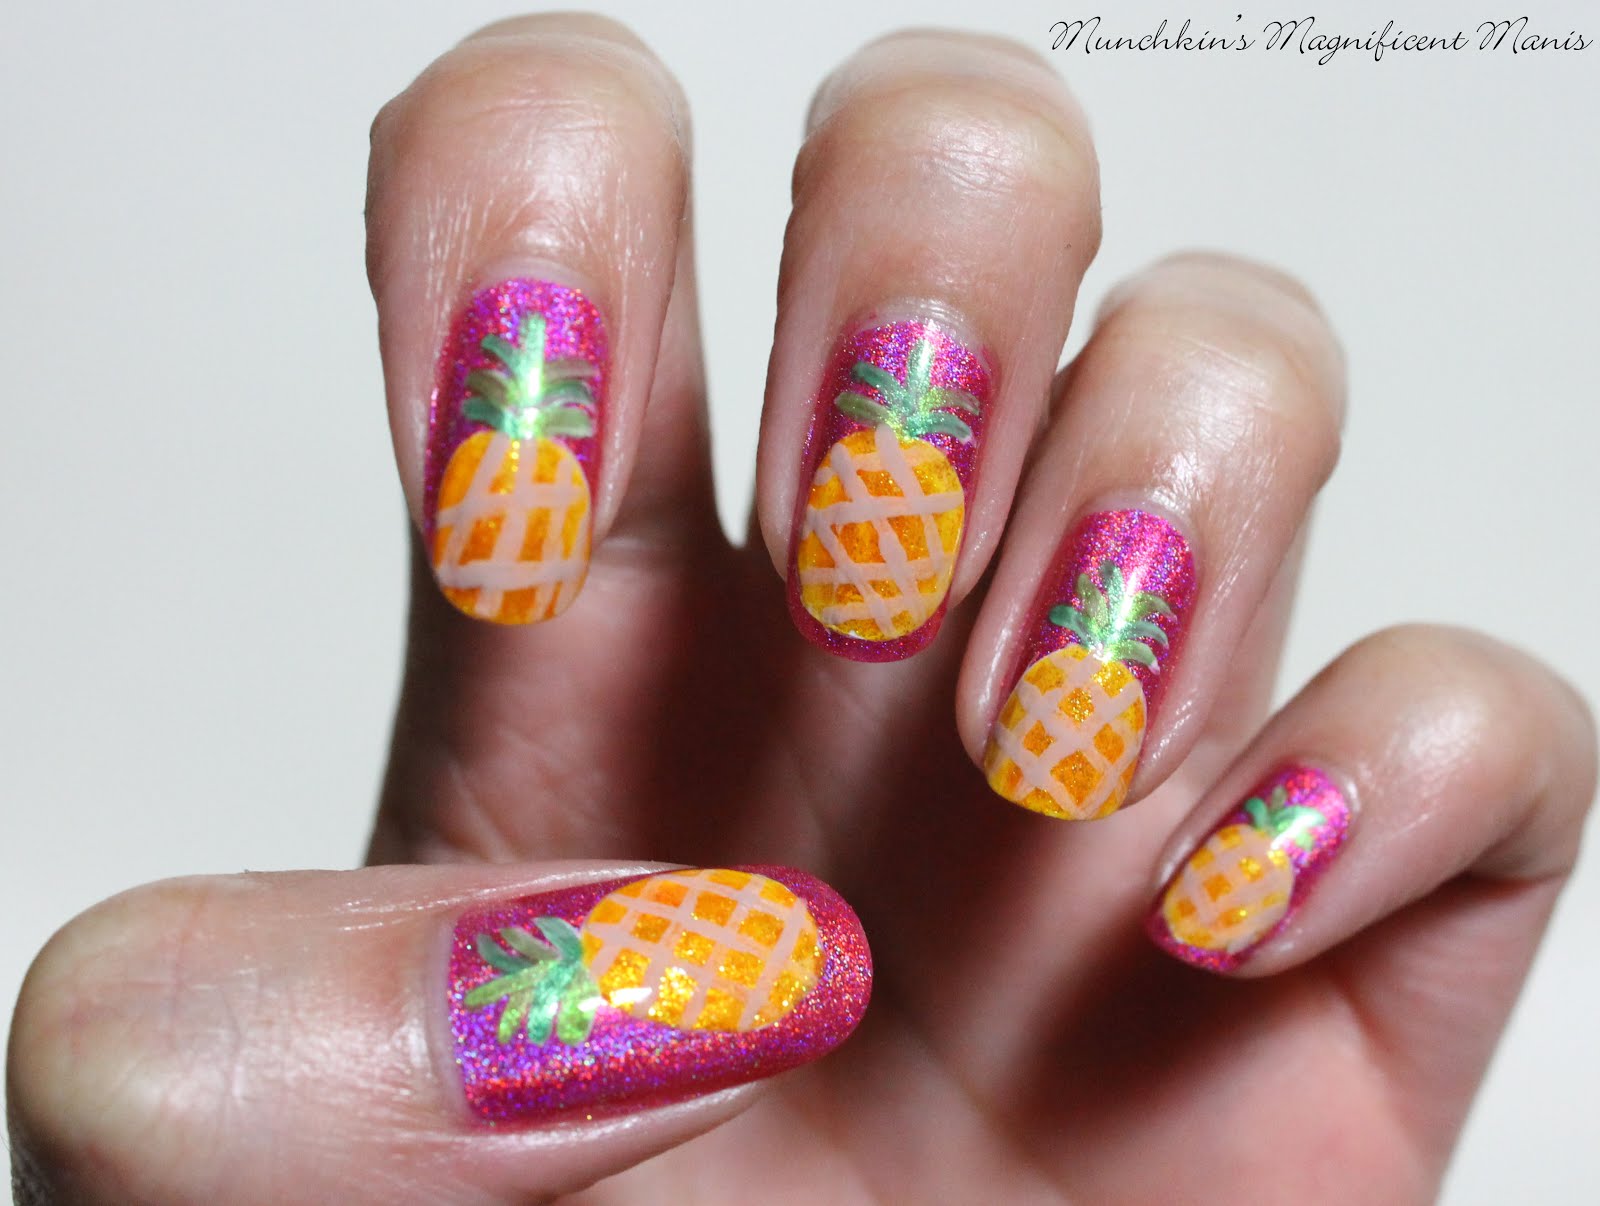 Pineapple Nail Design - wide 2